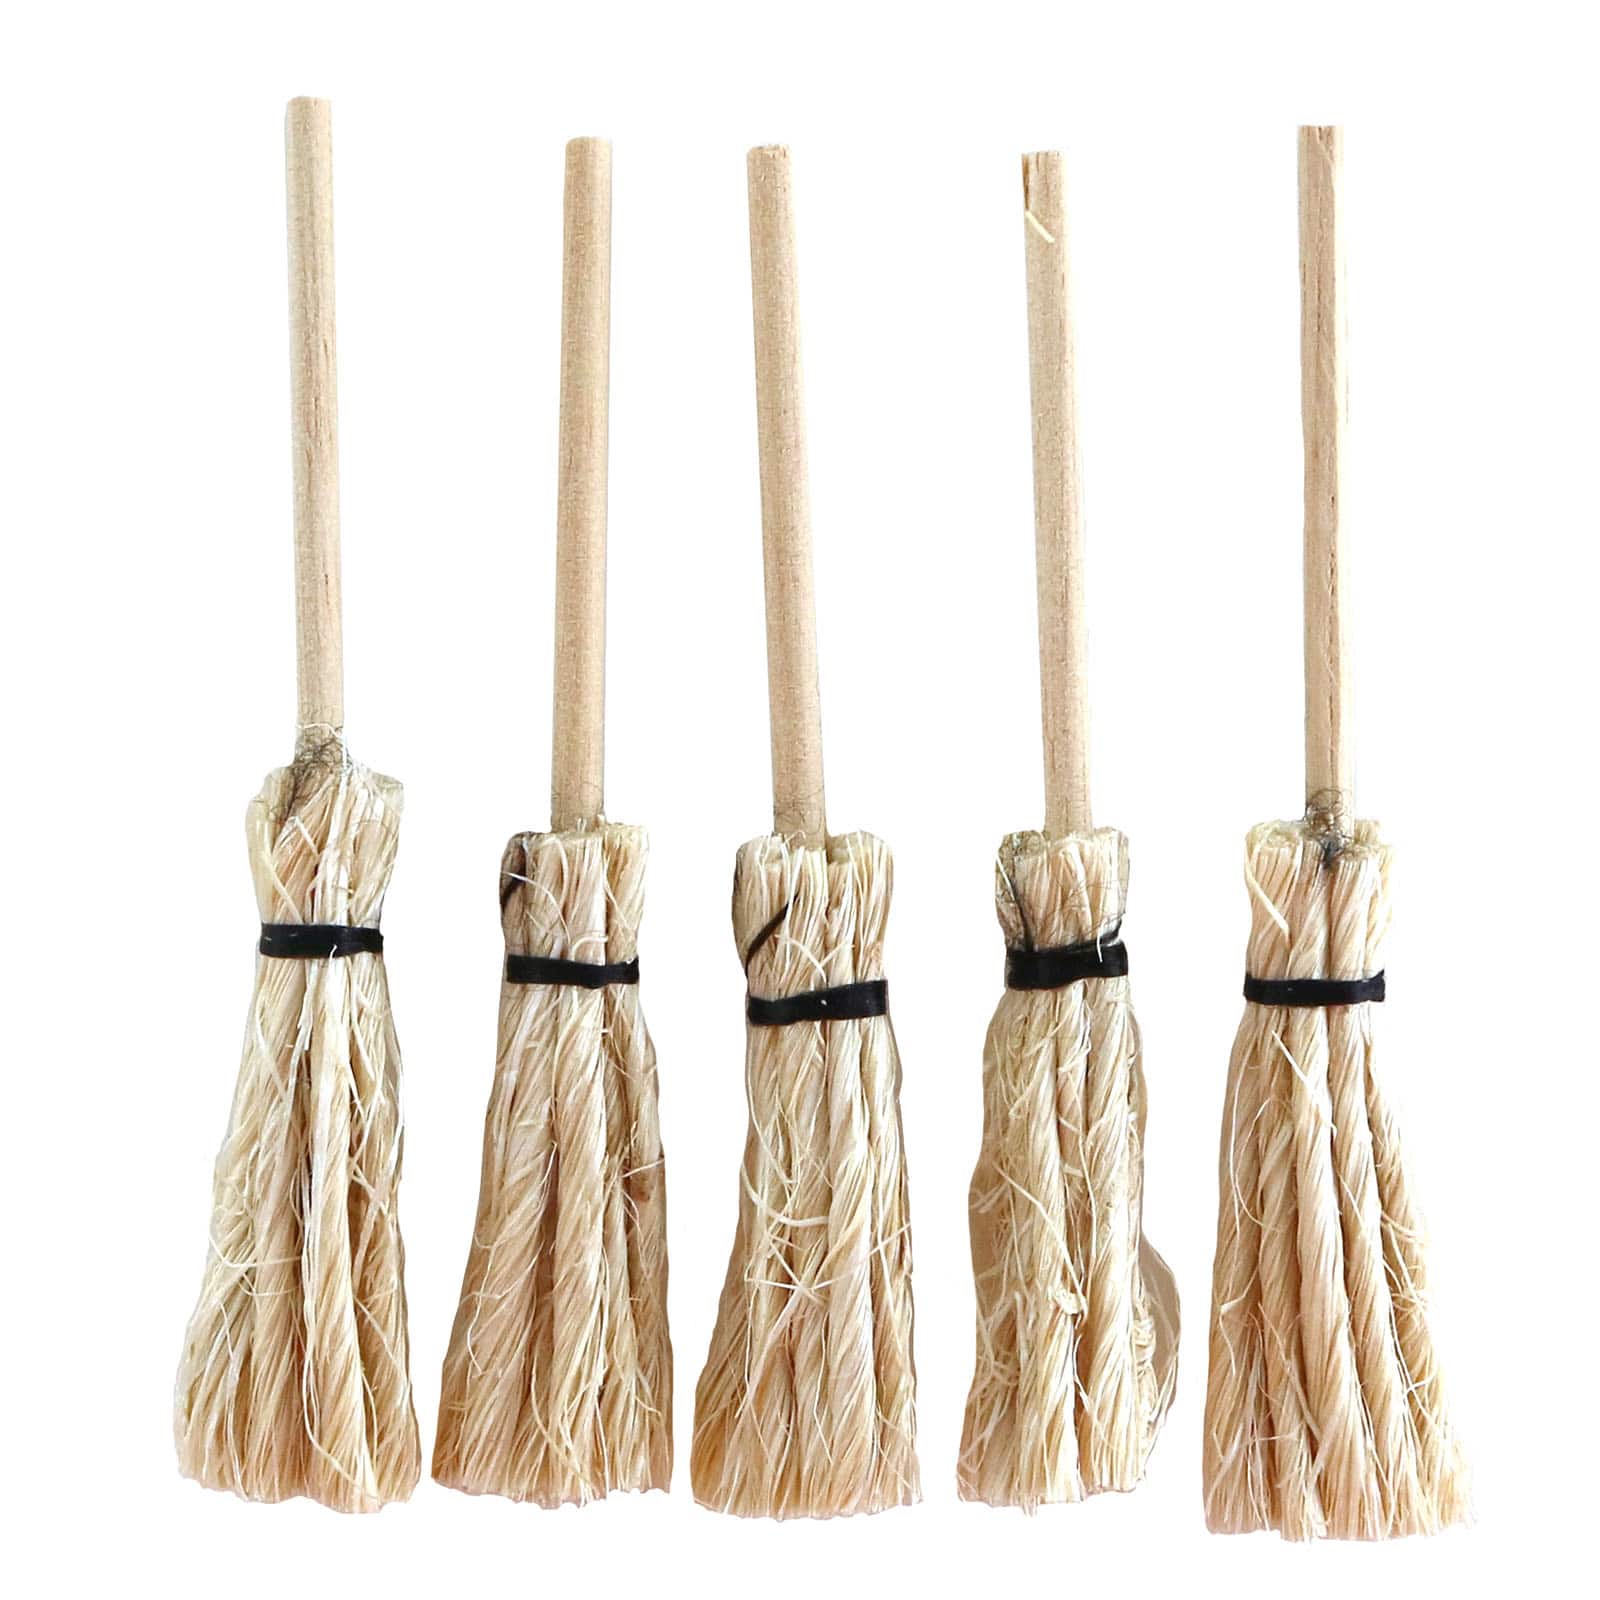 Find The Sparrow Innovations Miniatures Wood Brooms 5 Count At